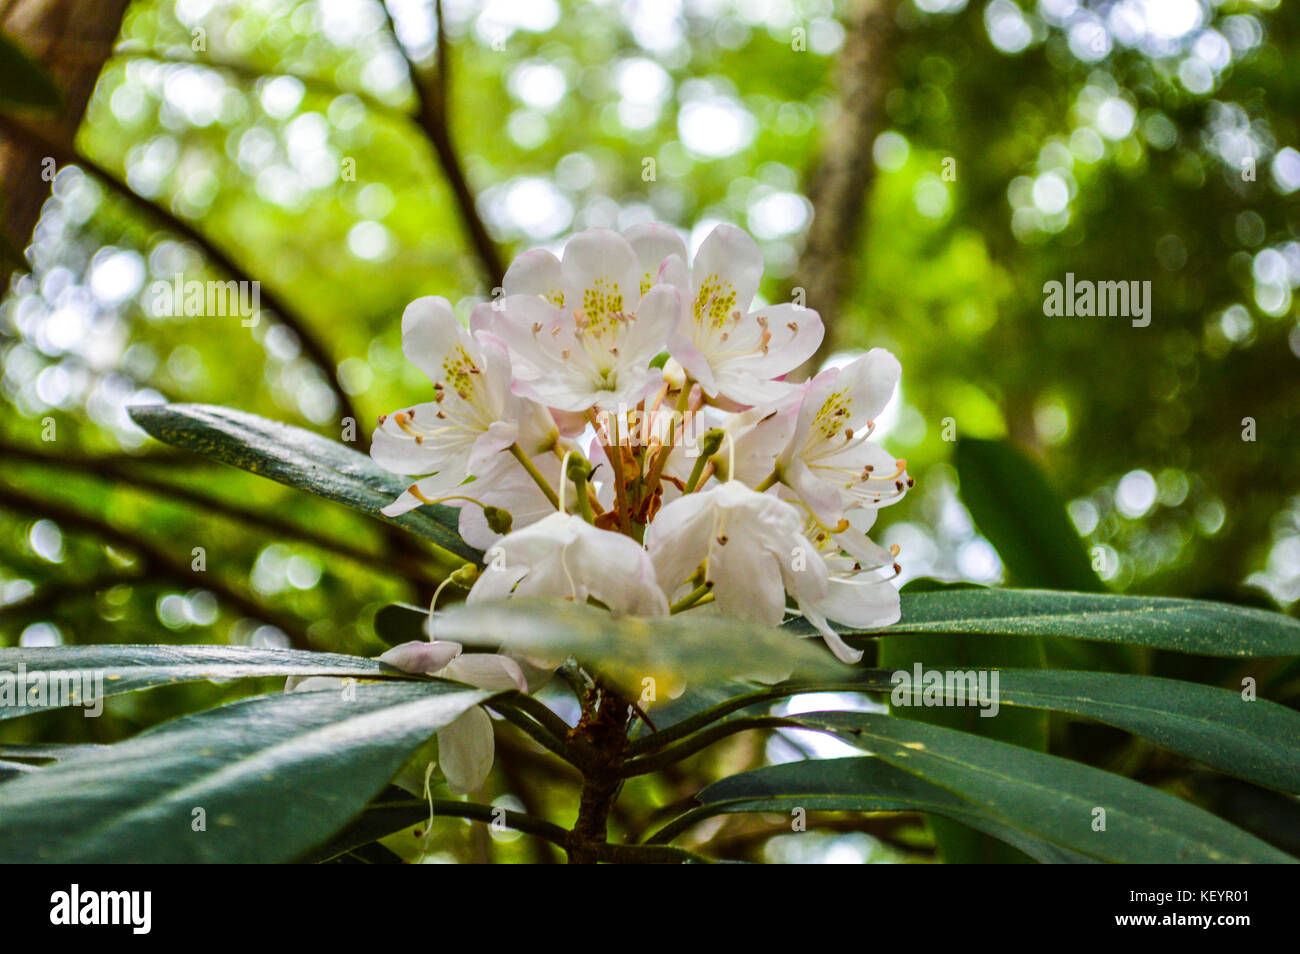 Beautiful Rhododendron flowers bloom in a New Hampshire State Park. Stock Photo